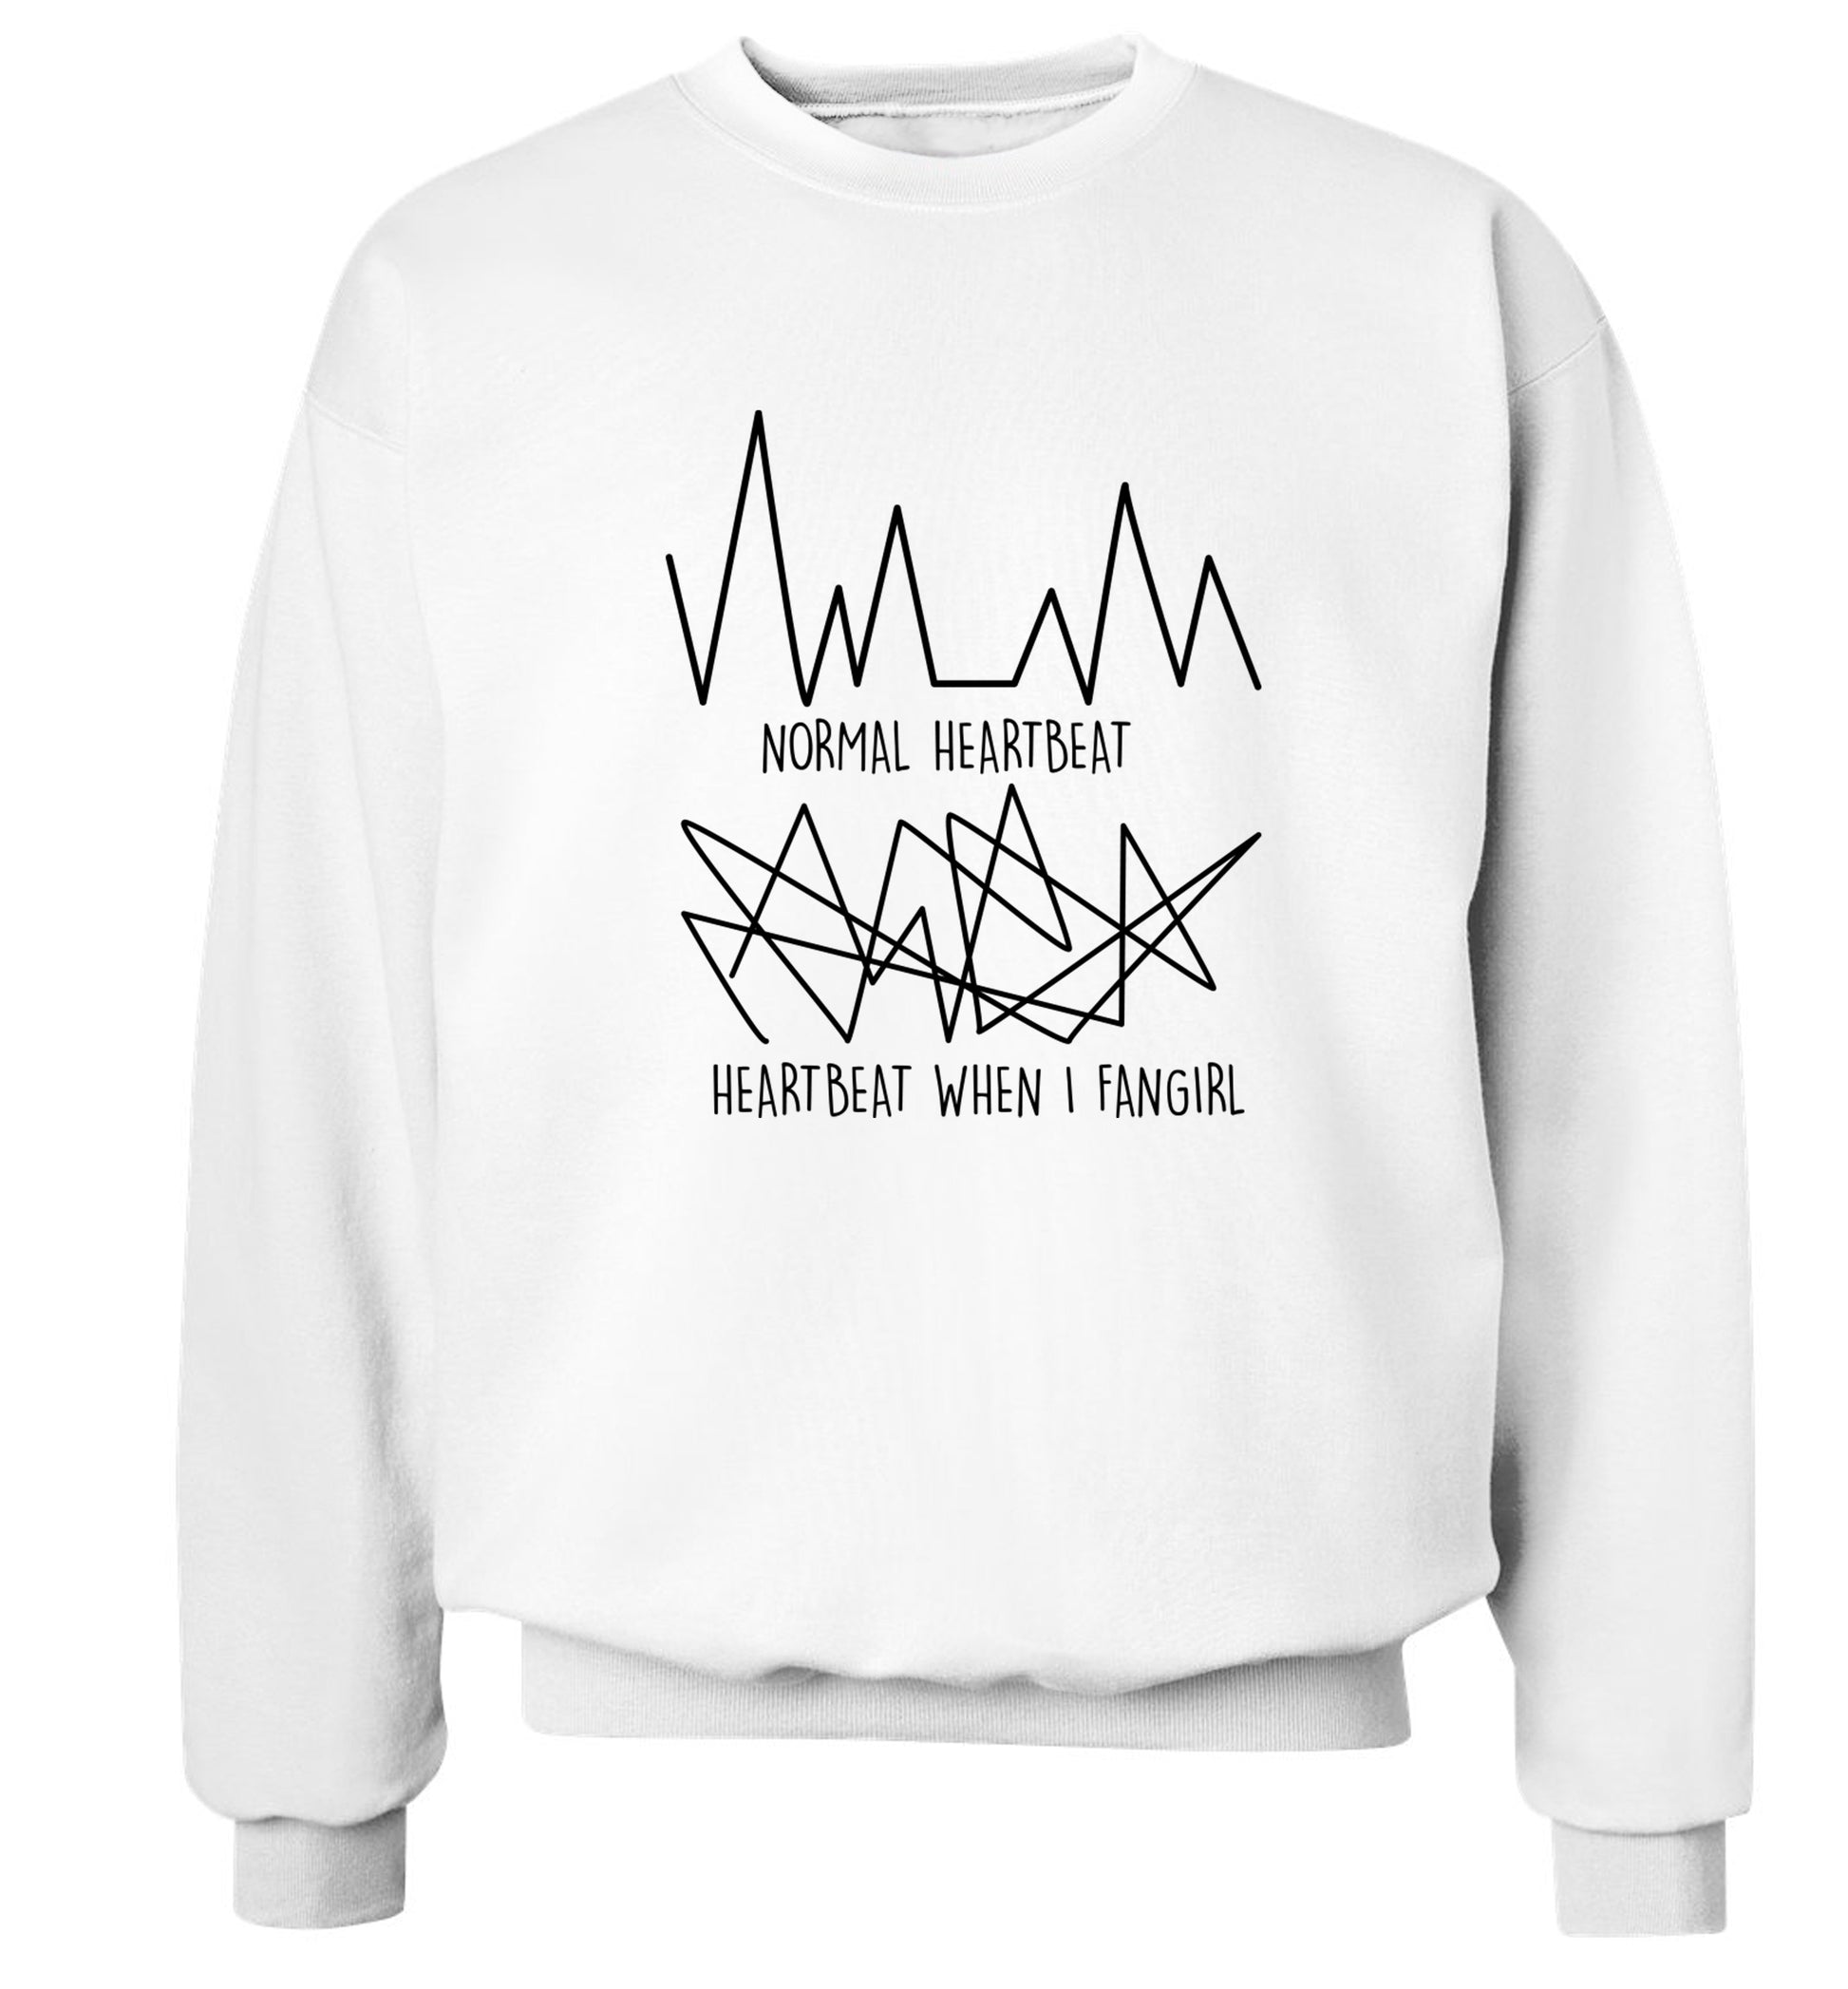 Normal heartbeat heartbeat when I fangirl Adult's unisex white Sweater 2XL